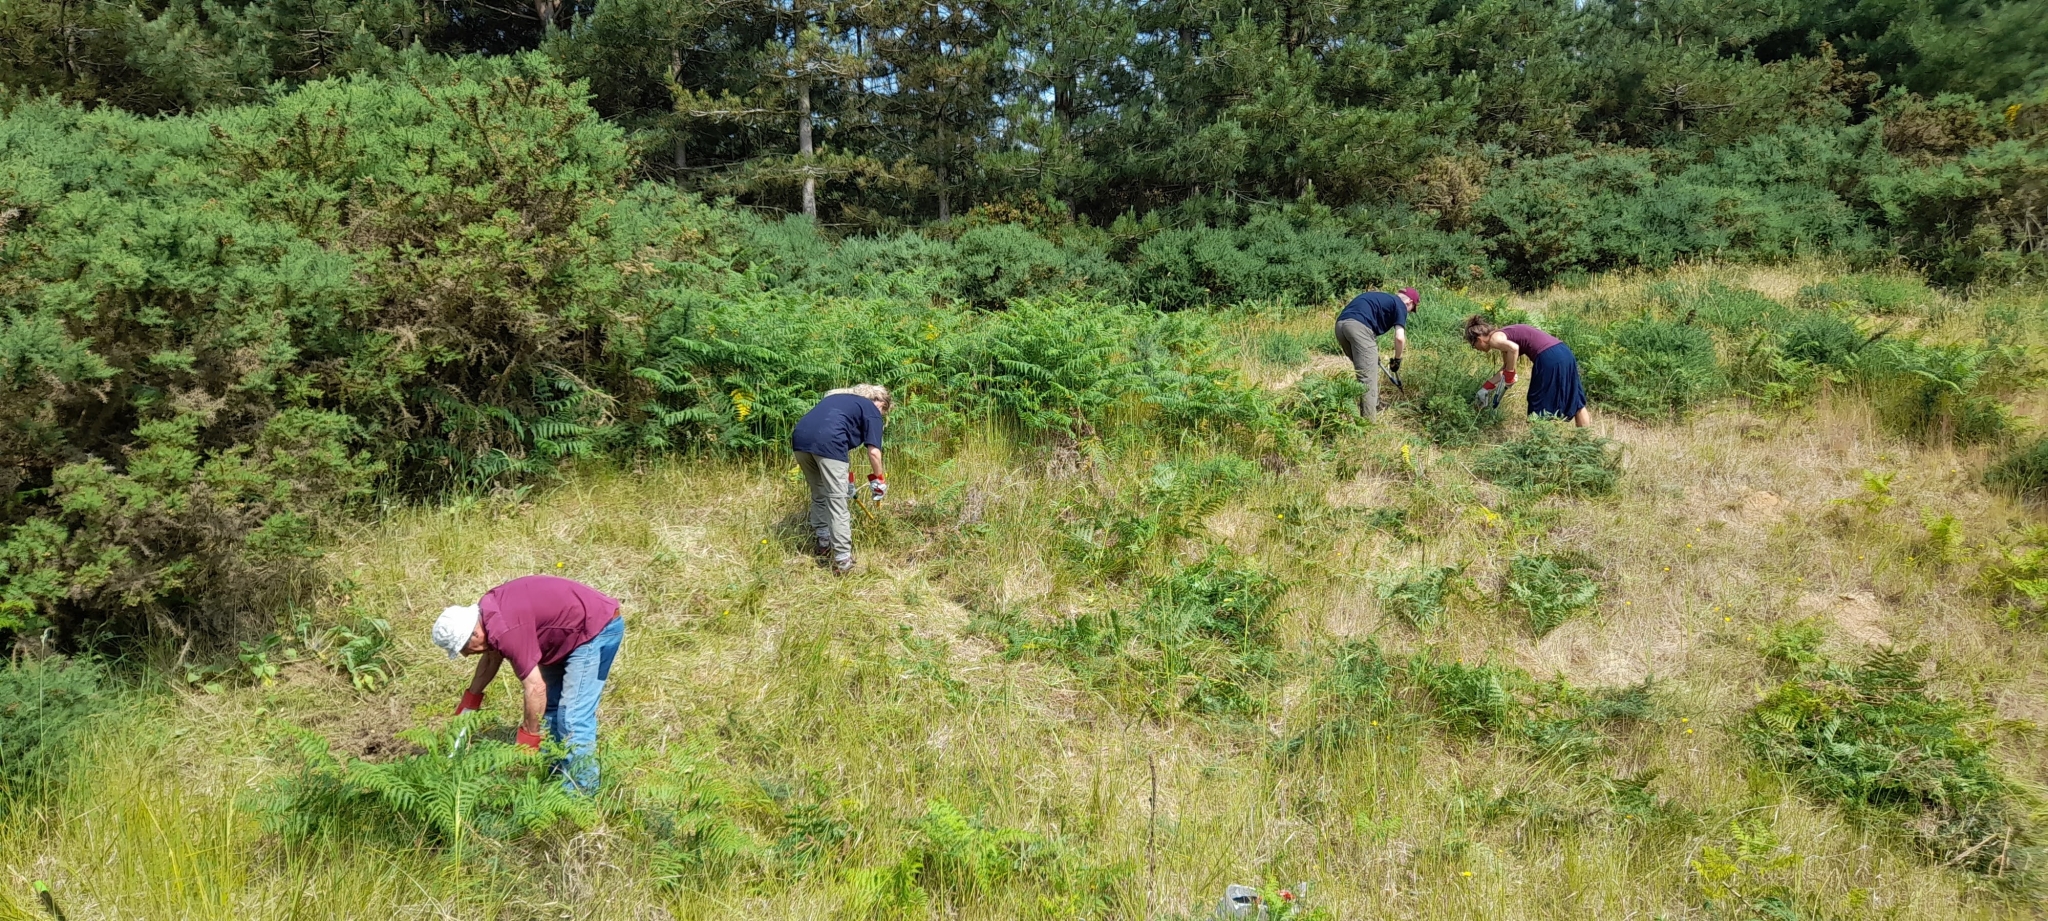 A photo from the FoTF Conservation Event - June 2023 - Broom and Gorse Removal at Mildenhall Mugwort Pit : Volunteers work at the top of one of the slopes of Mildenhall Mugwort Pit